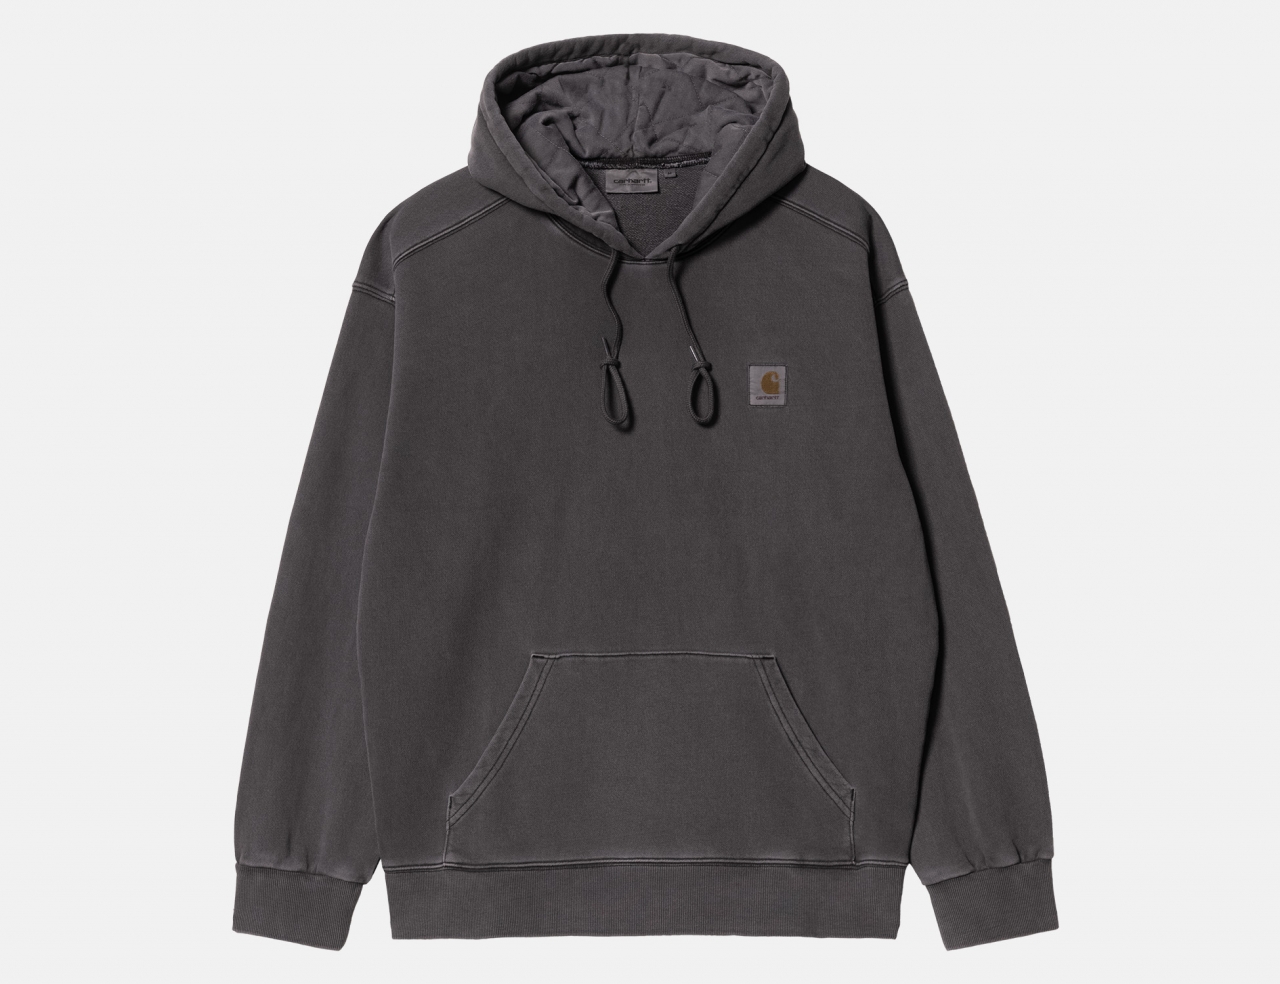 Carhartt WIP Nelson Hoodie - Charcoal Garment Dyed